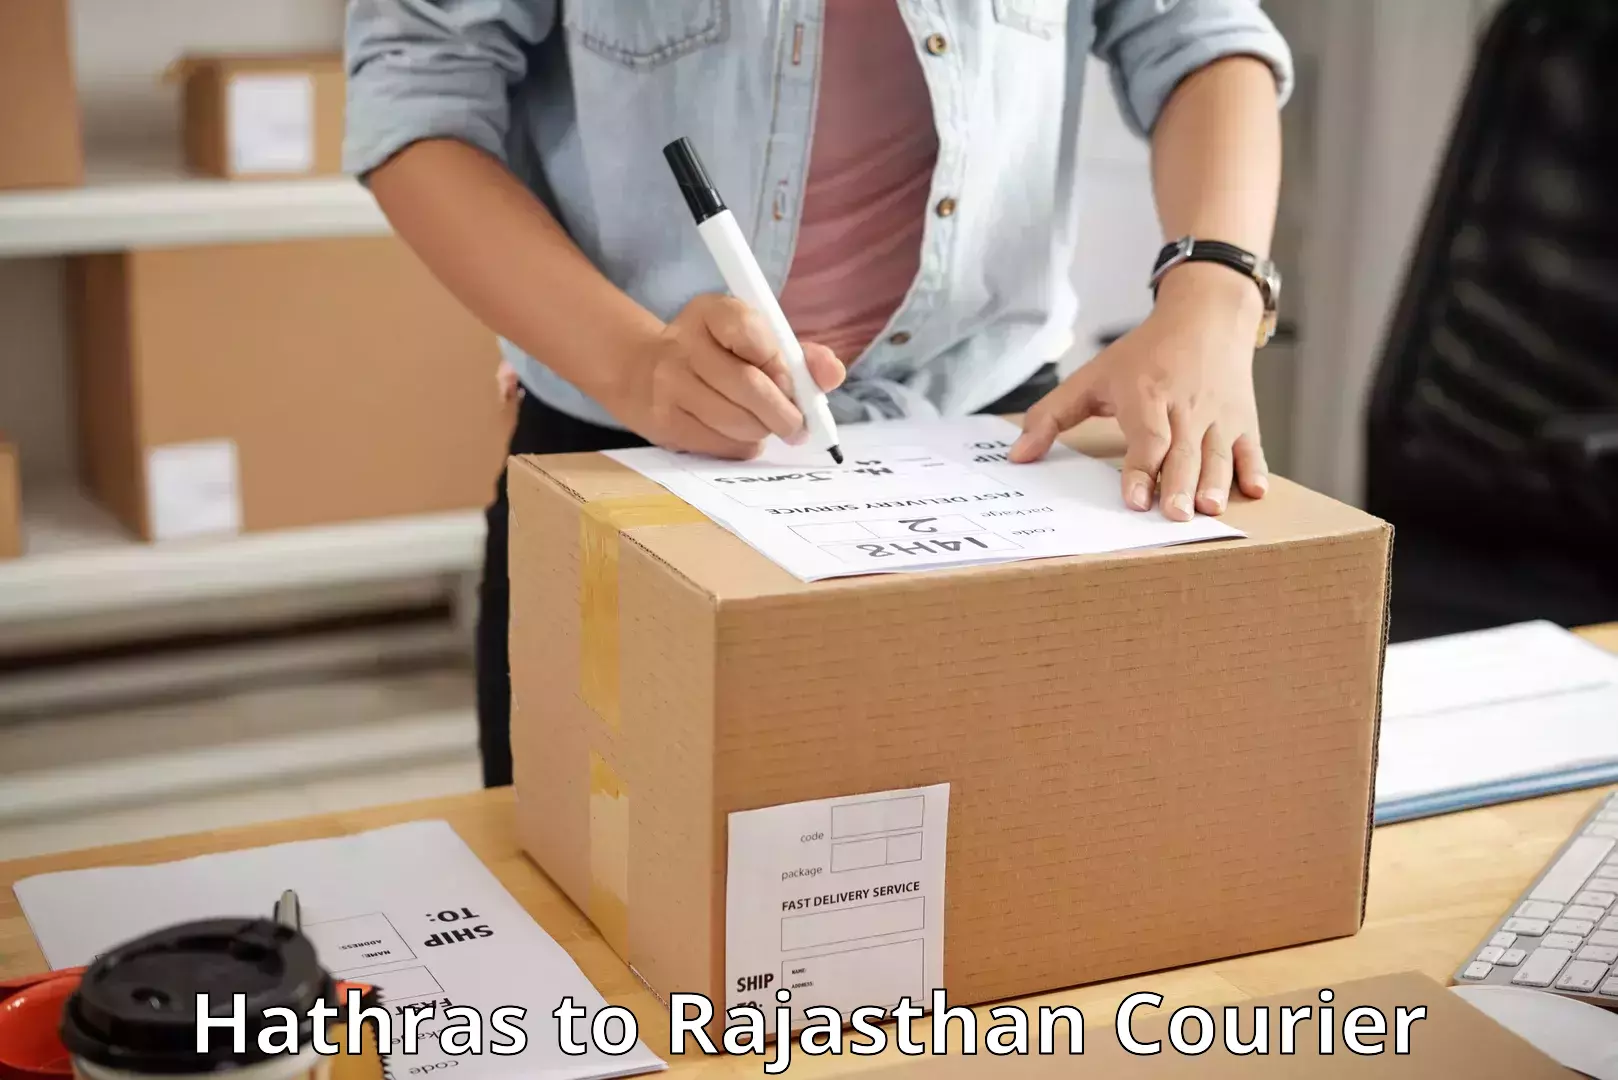 Courier service partnerships Hathras to Yathalakunta